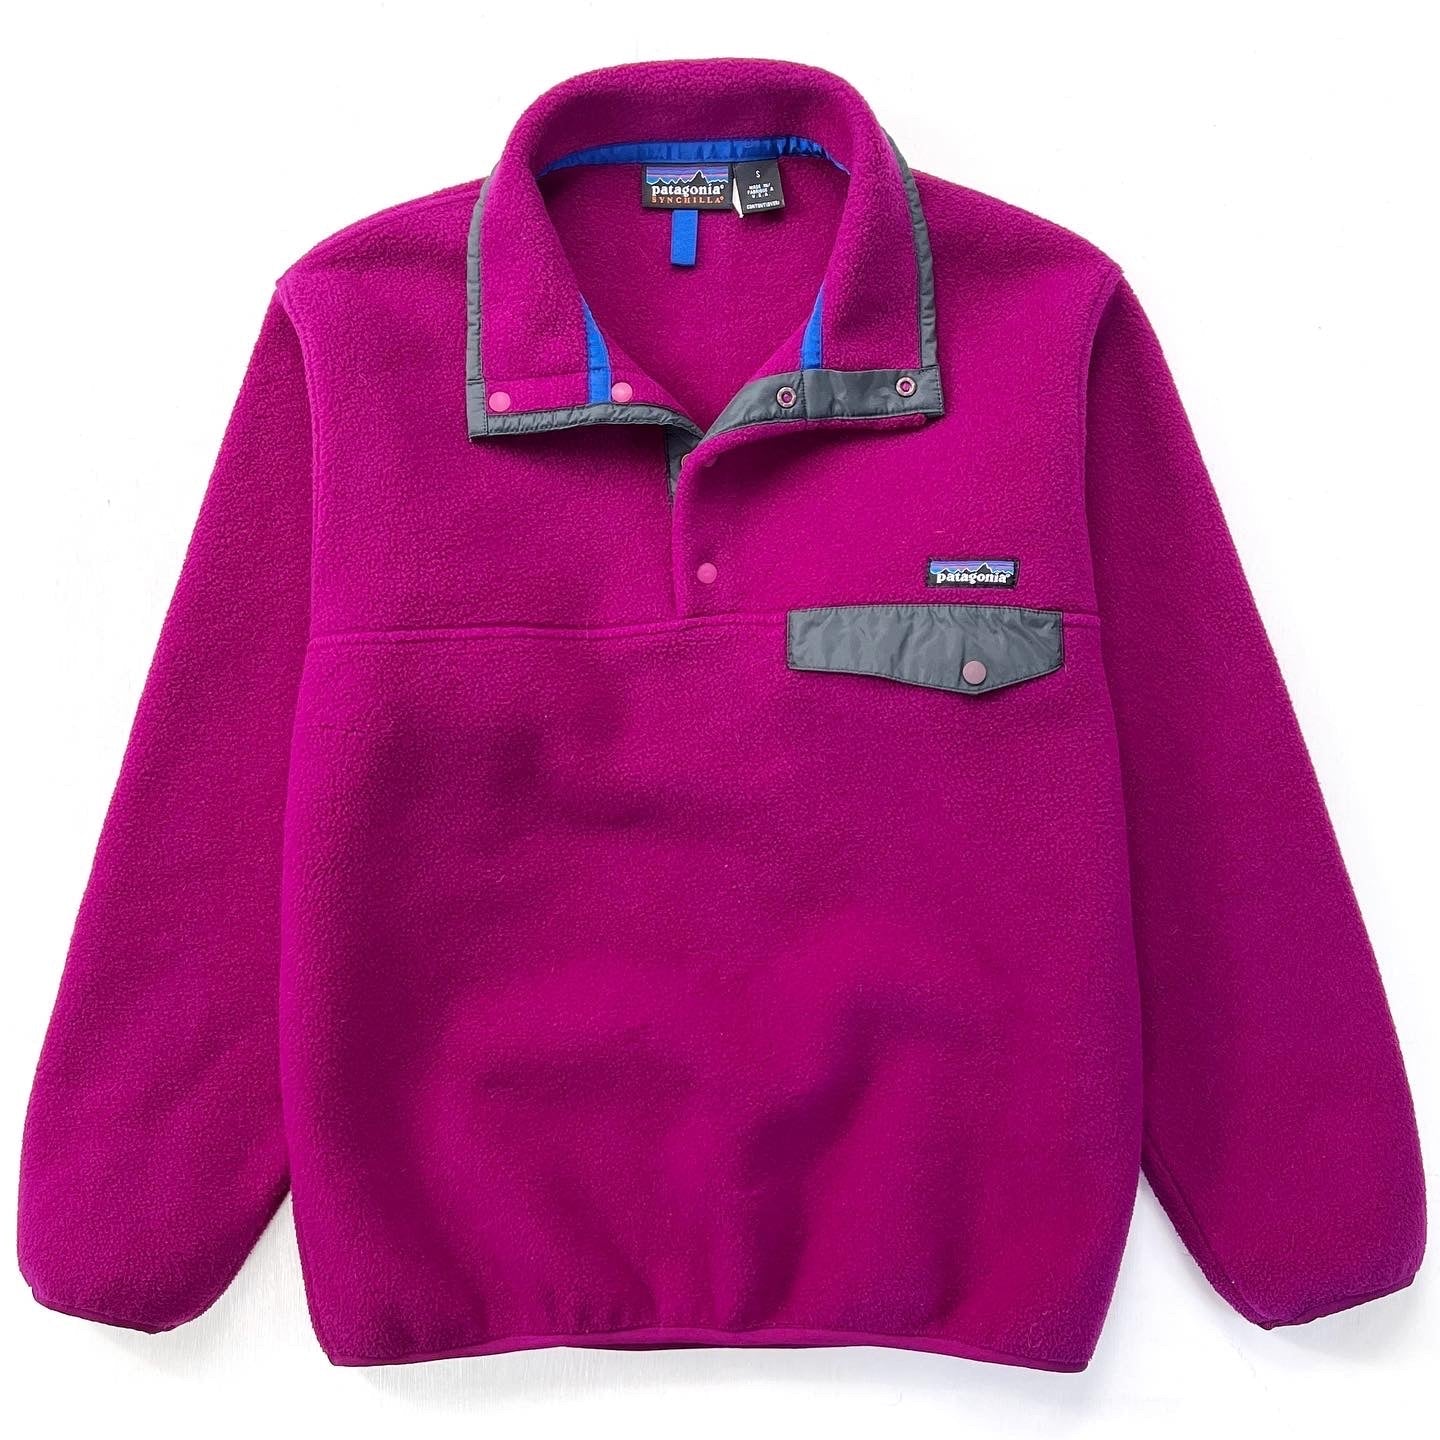 1999 Patagonia Made In The U.S.A. Synchilla Snap-T, Raspberry (S)